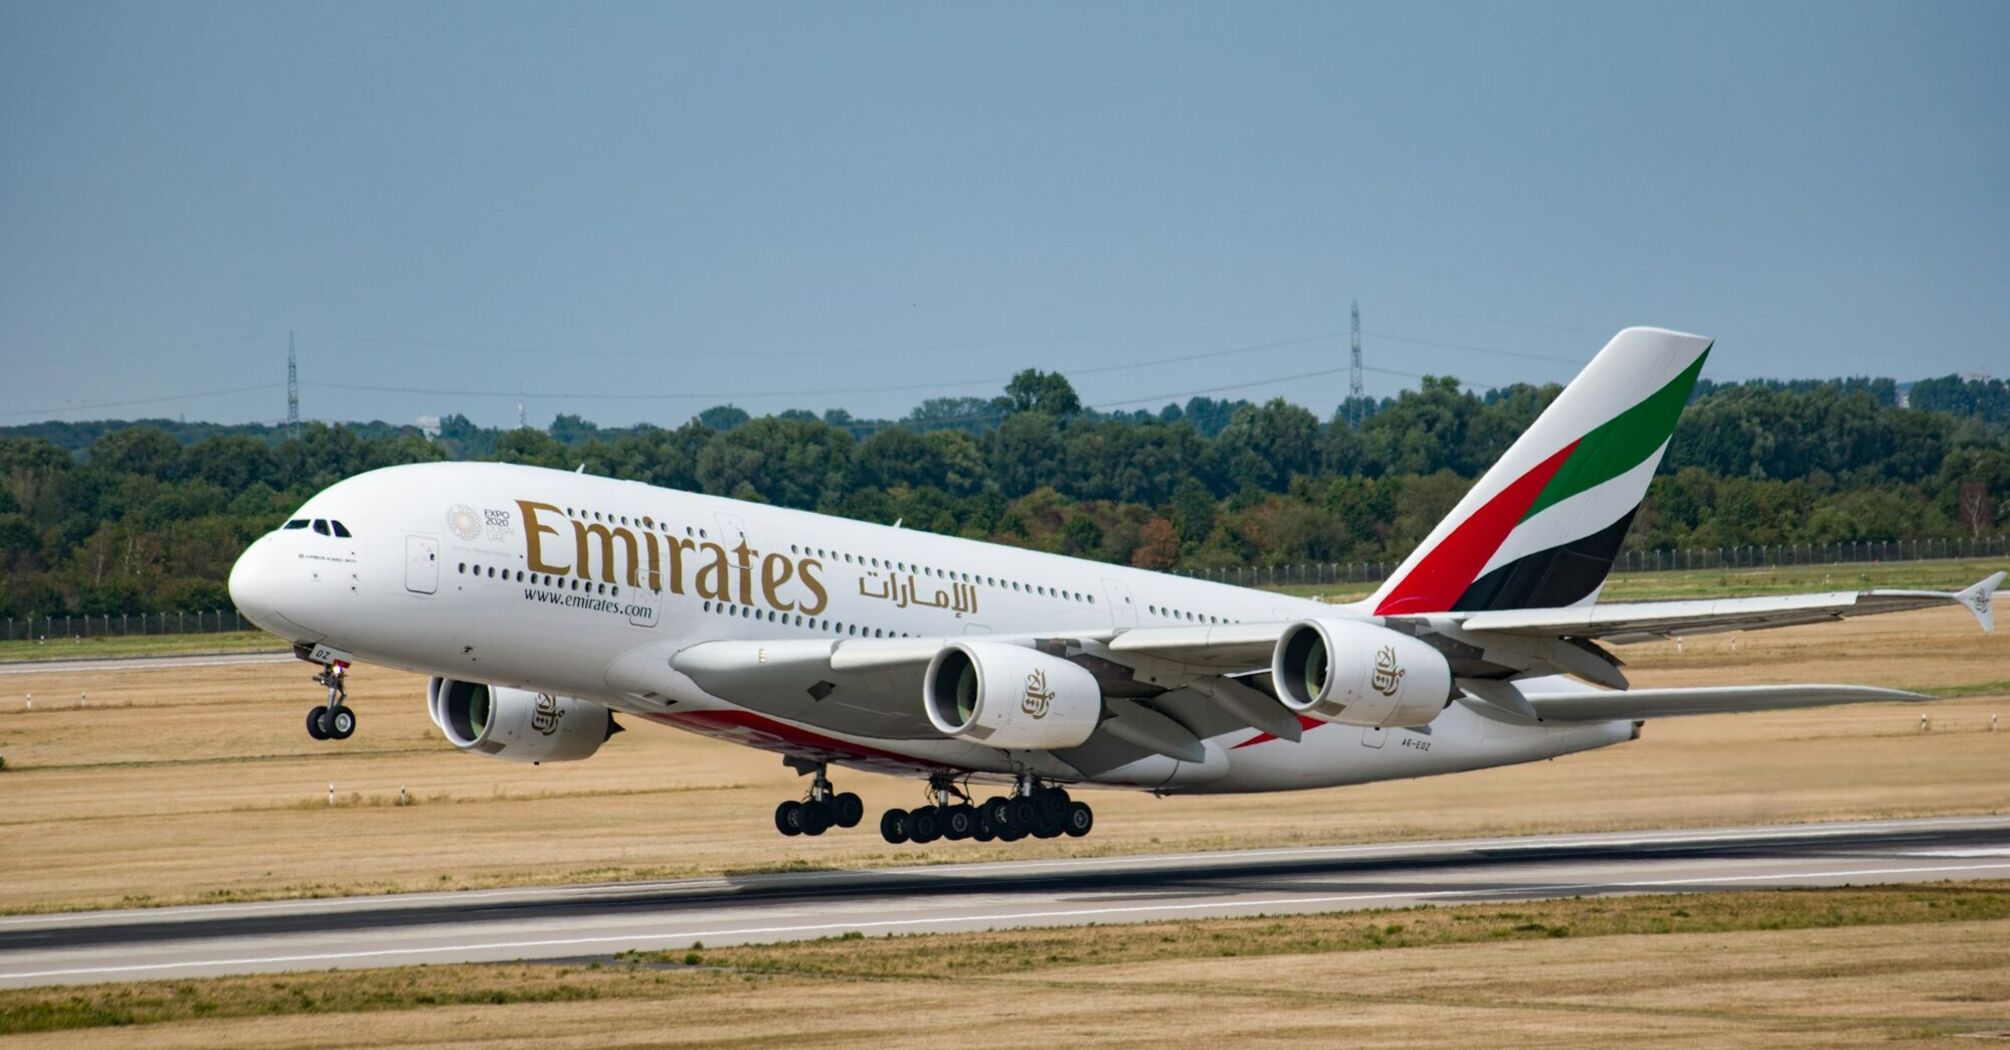 Emirates aircraft taking off